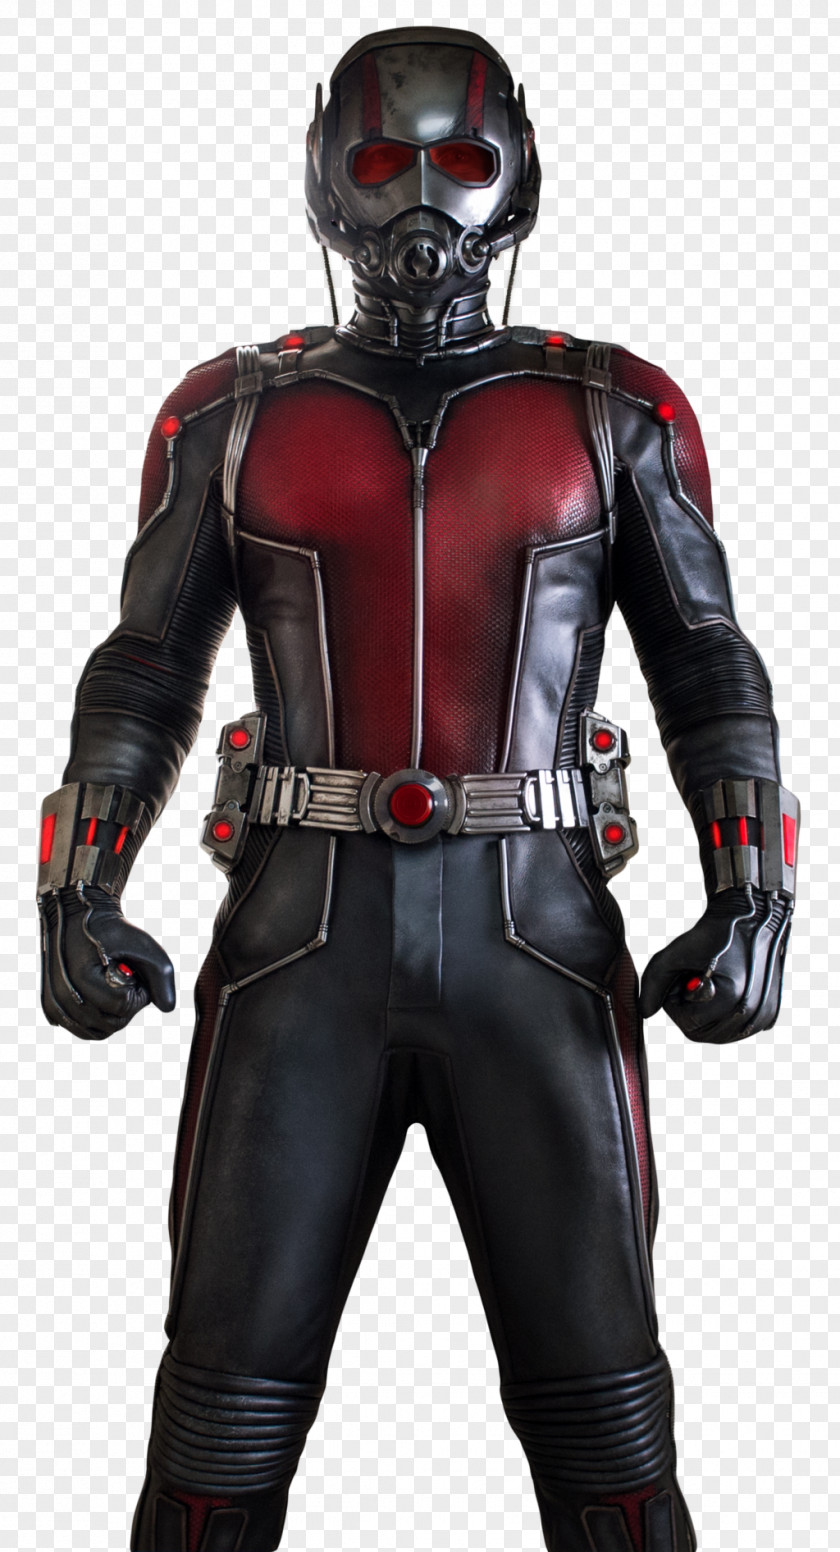 Ant Man Hank Pym Ant-Man Wasp Marvel Cinematic Universe Film PNG